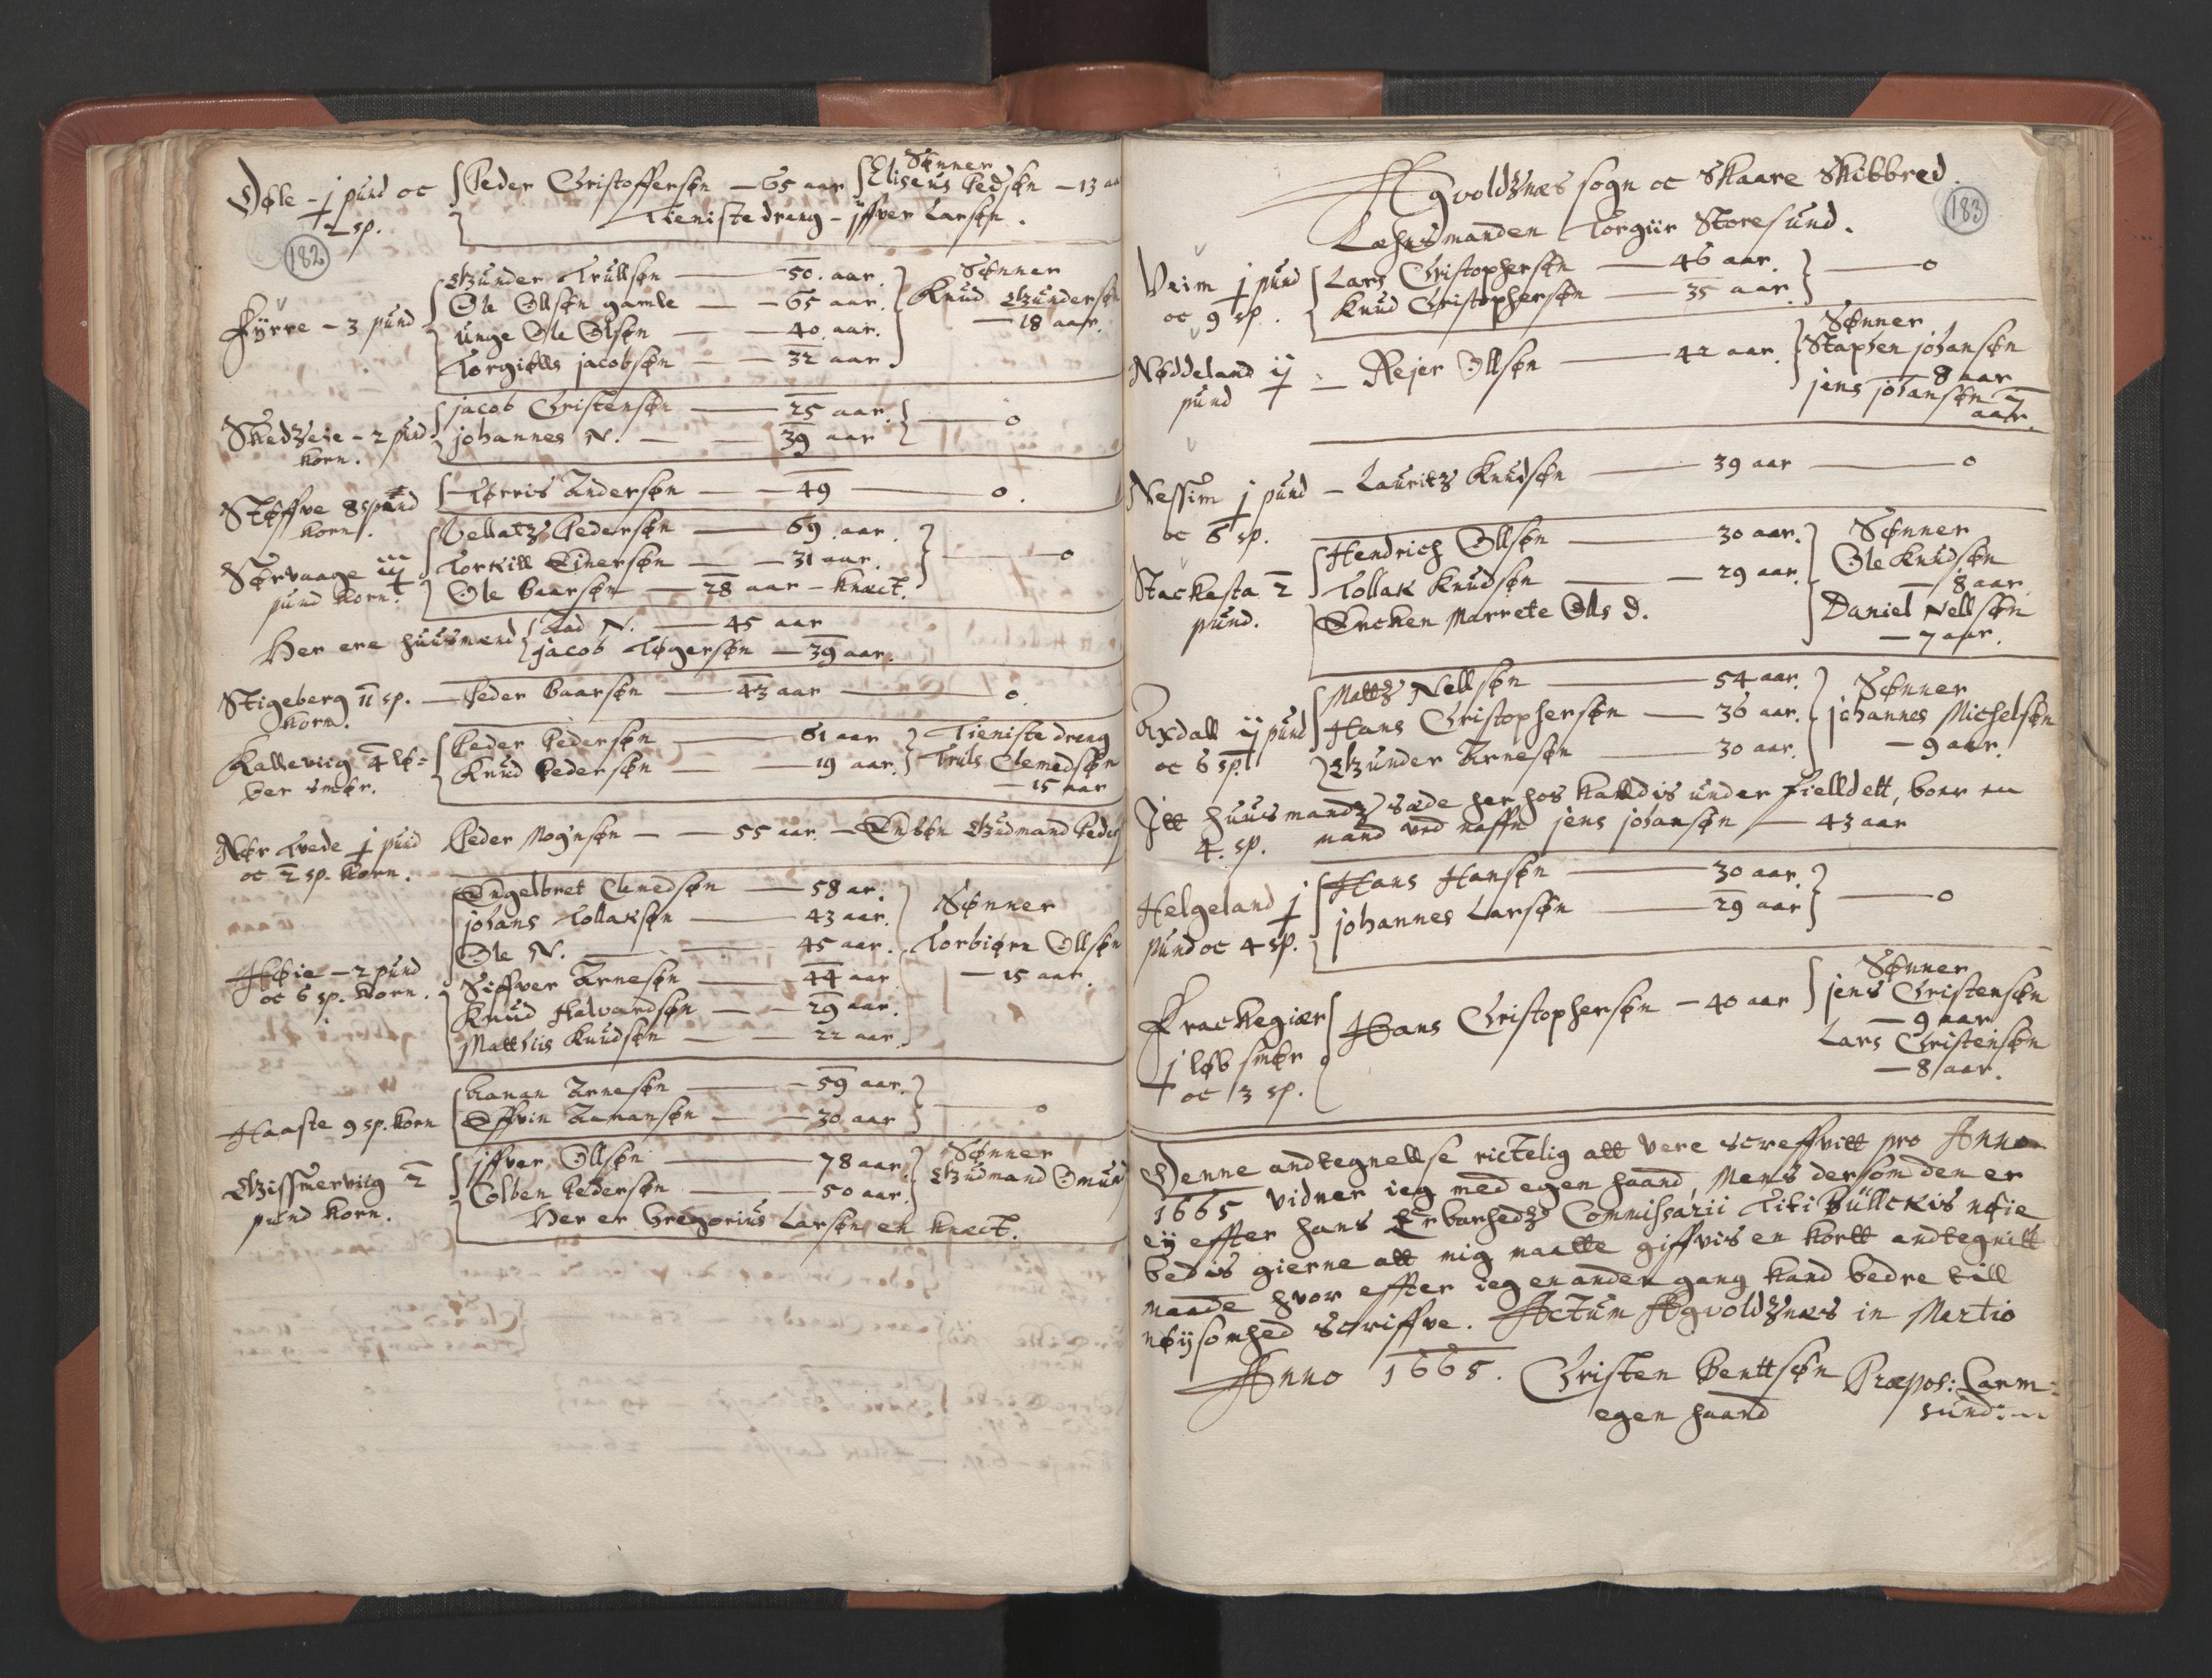 RA, Vicar's Census 1664-1666, no. 18: Stavanger deanery and Karmsund deanery, 1664-1666, p. 182-183